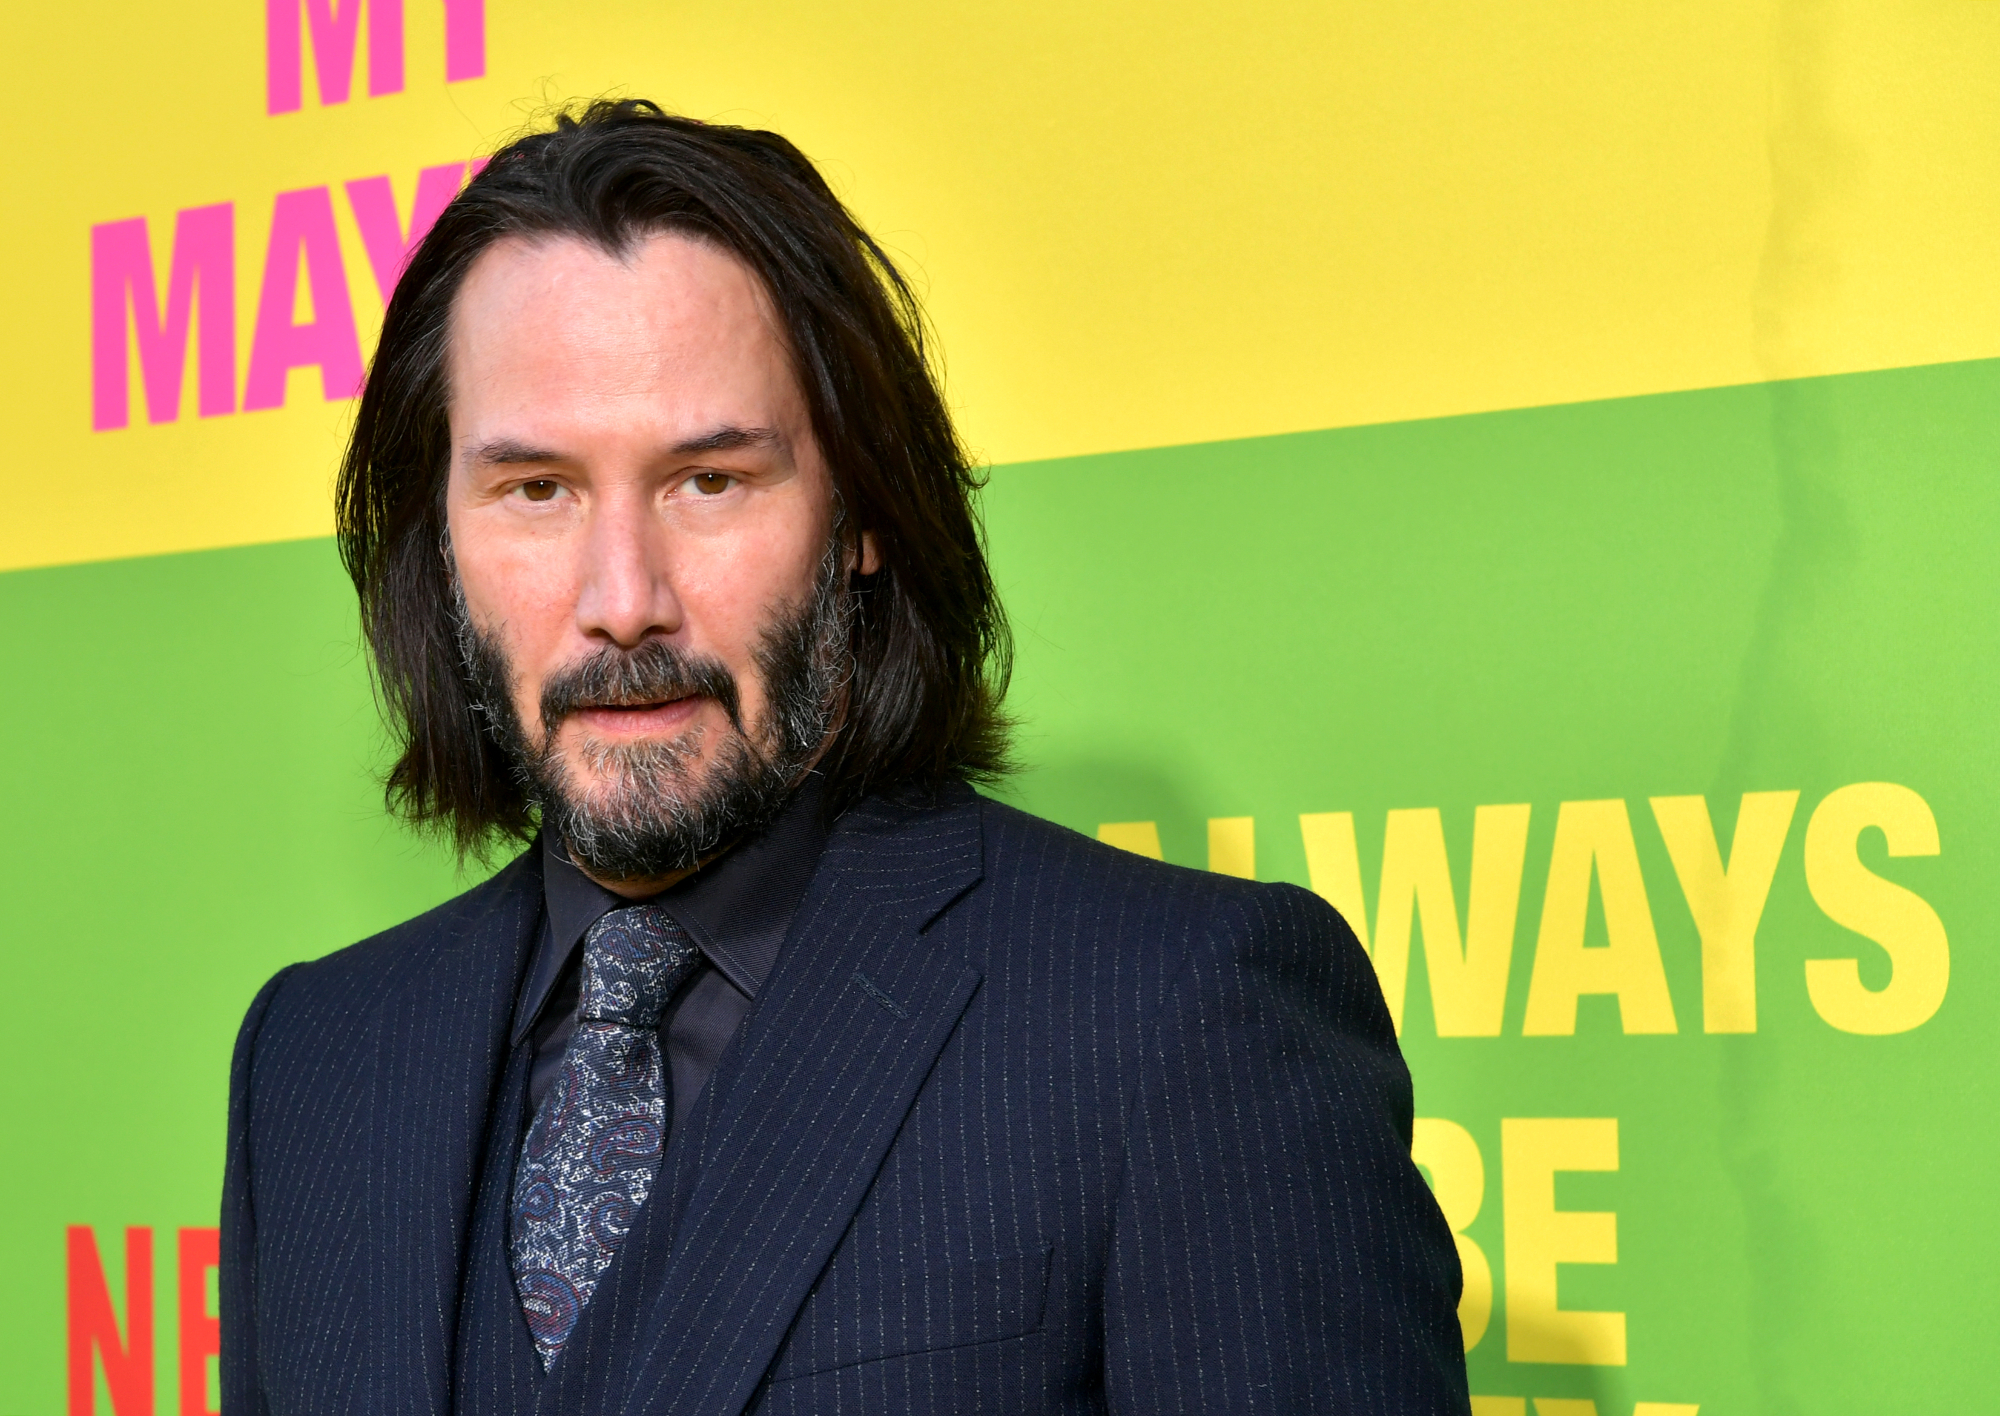 Keanu Reeves wearing a suit in front of a step and repeat